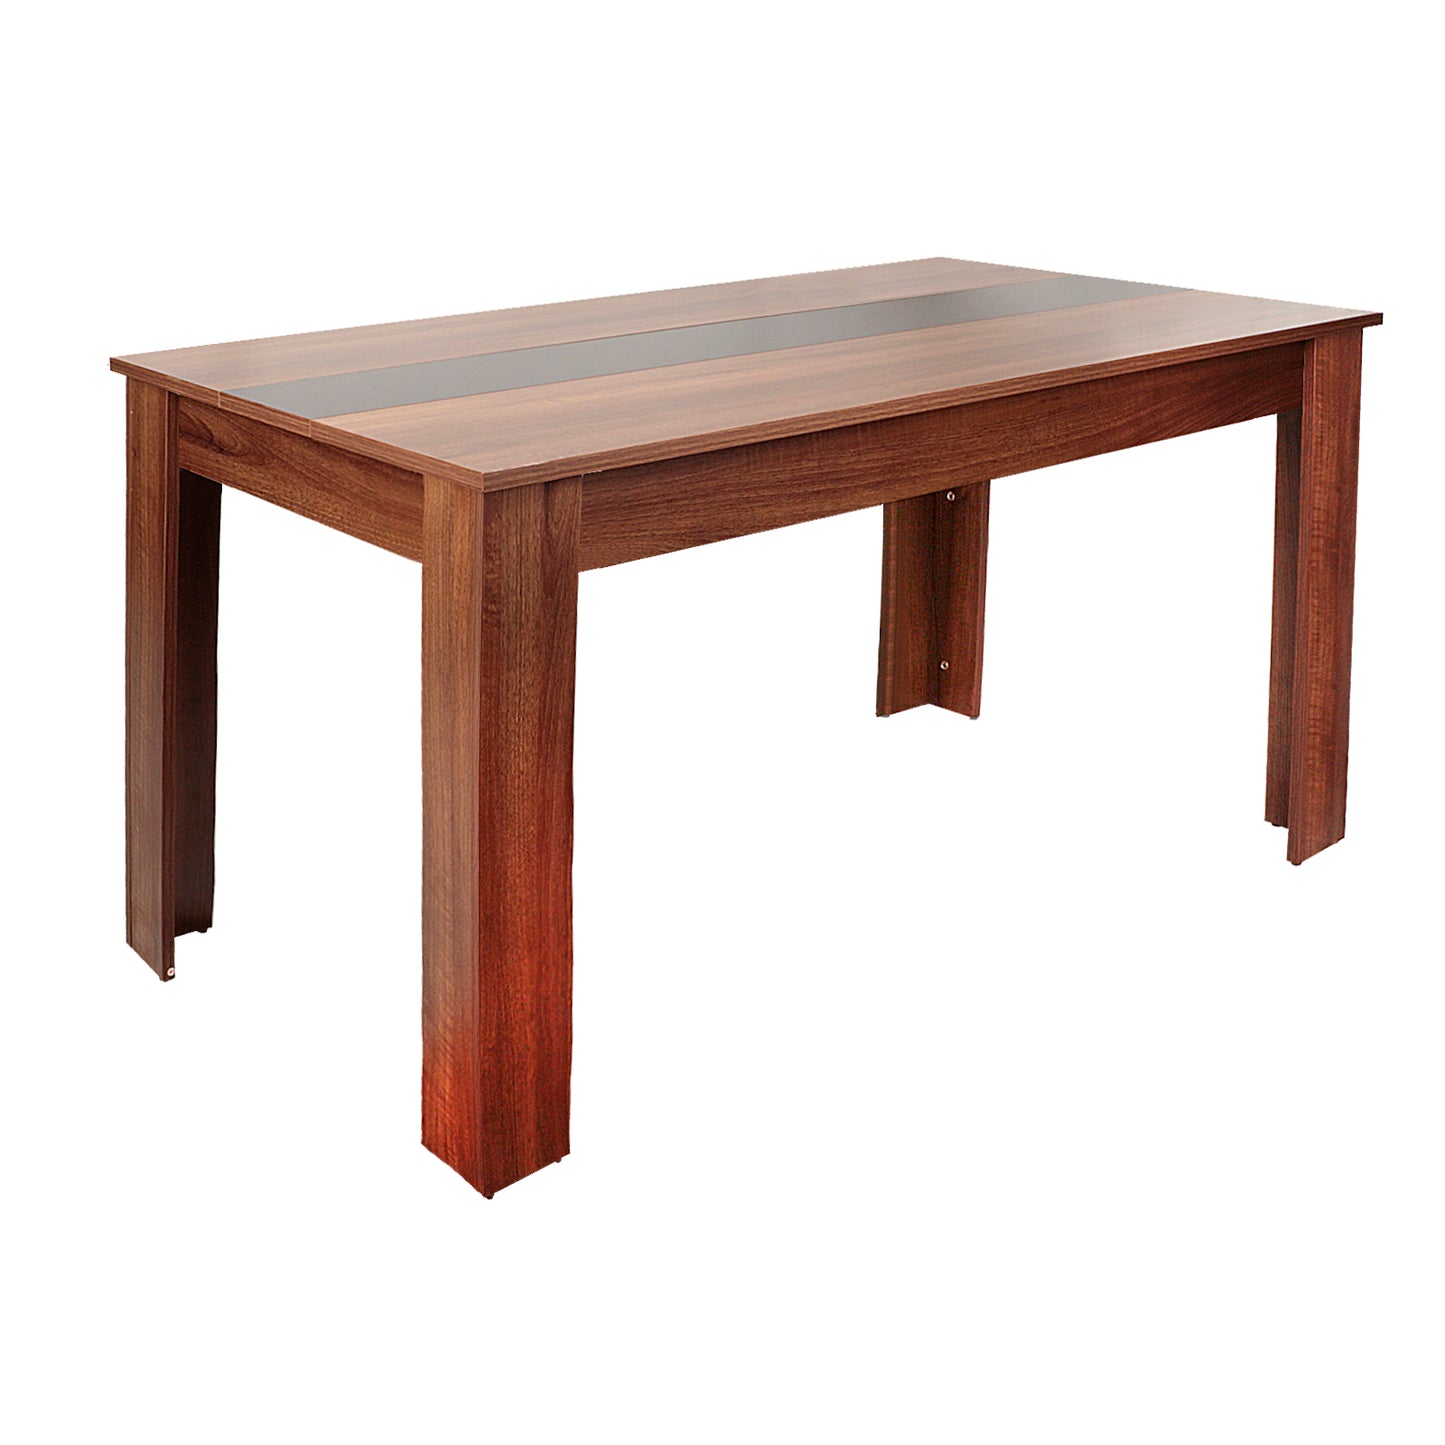 GIVENUSMYF European dining table Height 29.5" Particleboard dark wood with melamine beech wood grain